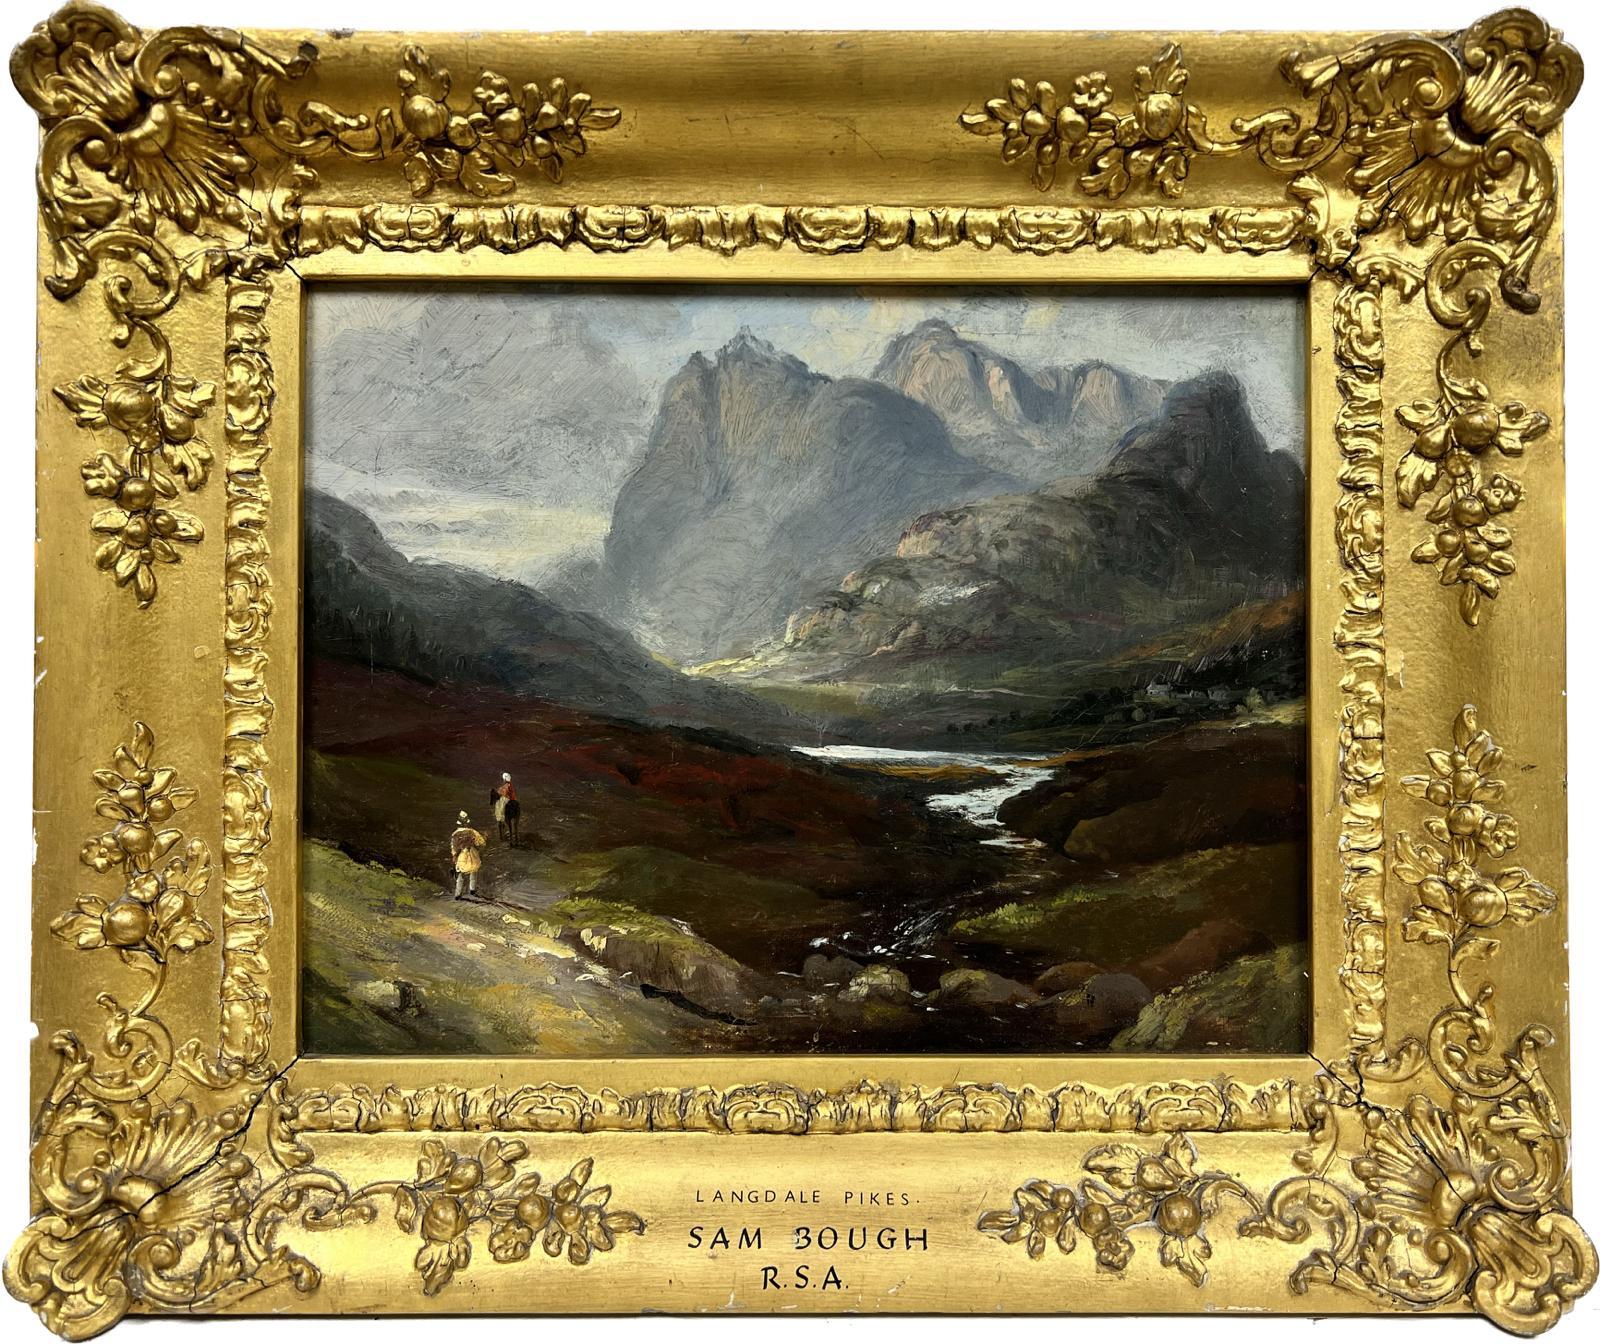 Samuel Bough Figurative Painting - Fine Mid 19th Century Oil Majestic Lake District Mountain Valley Landscape 